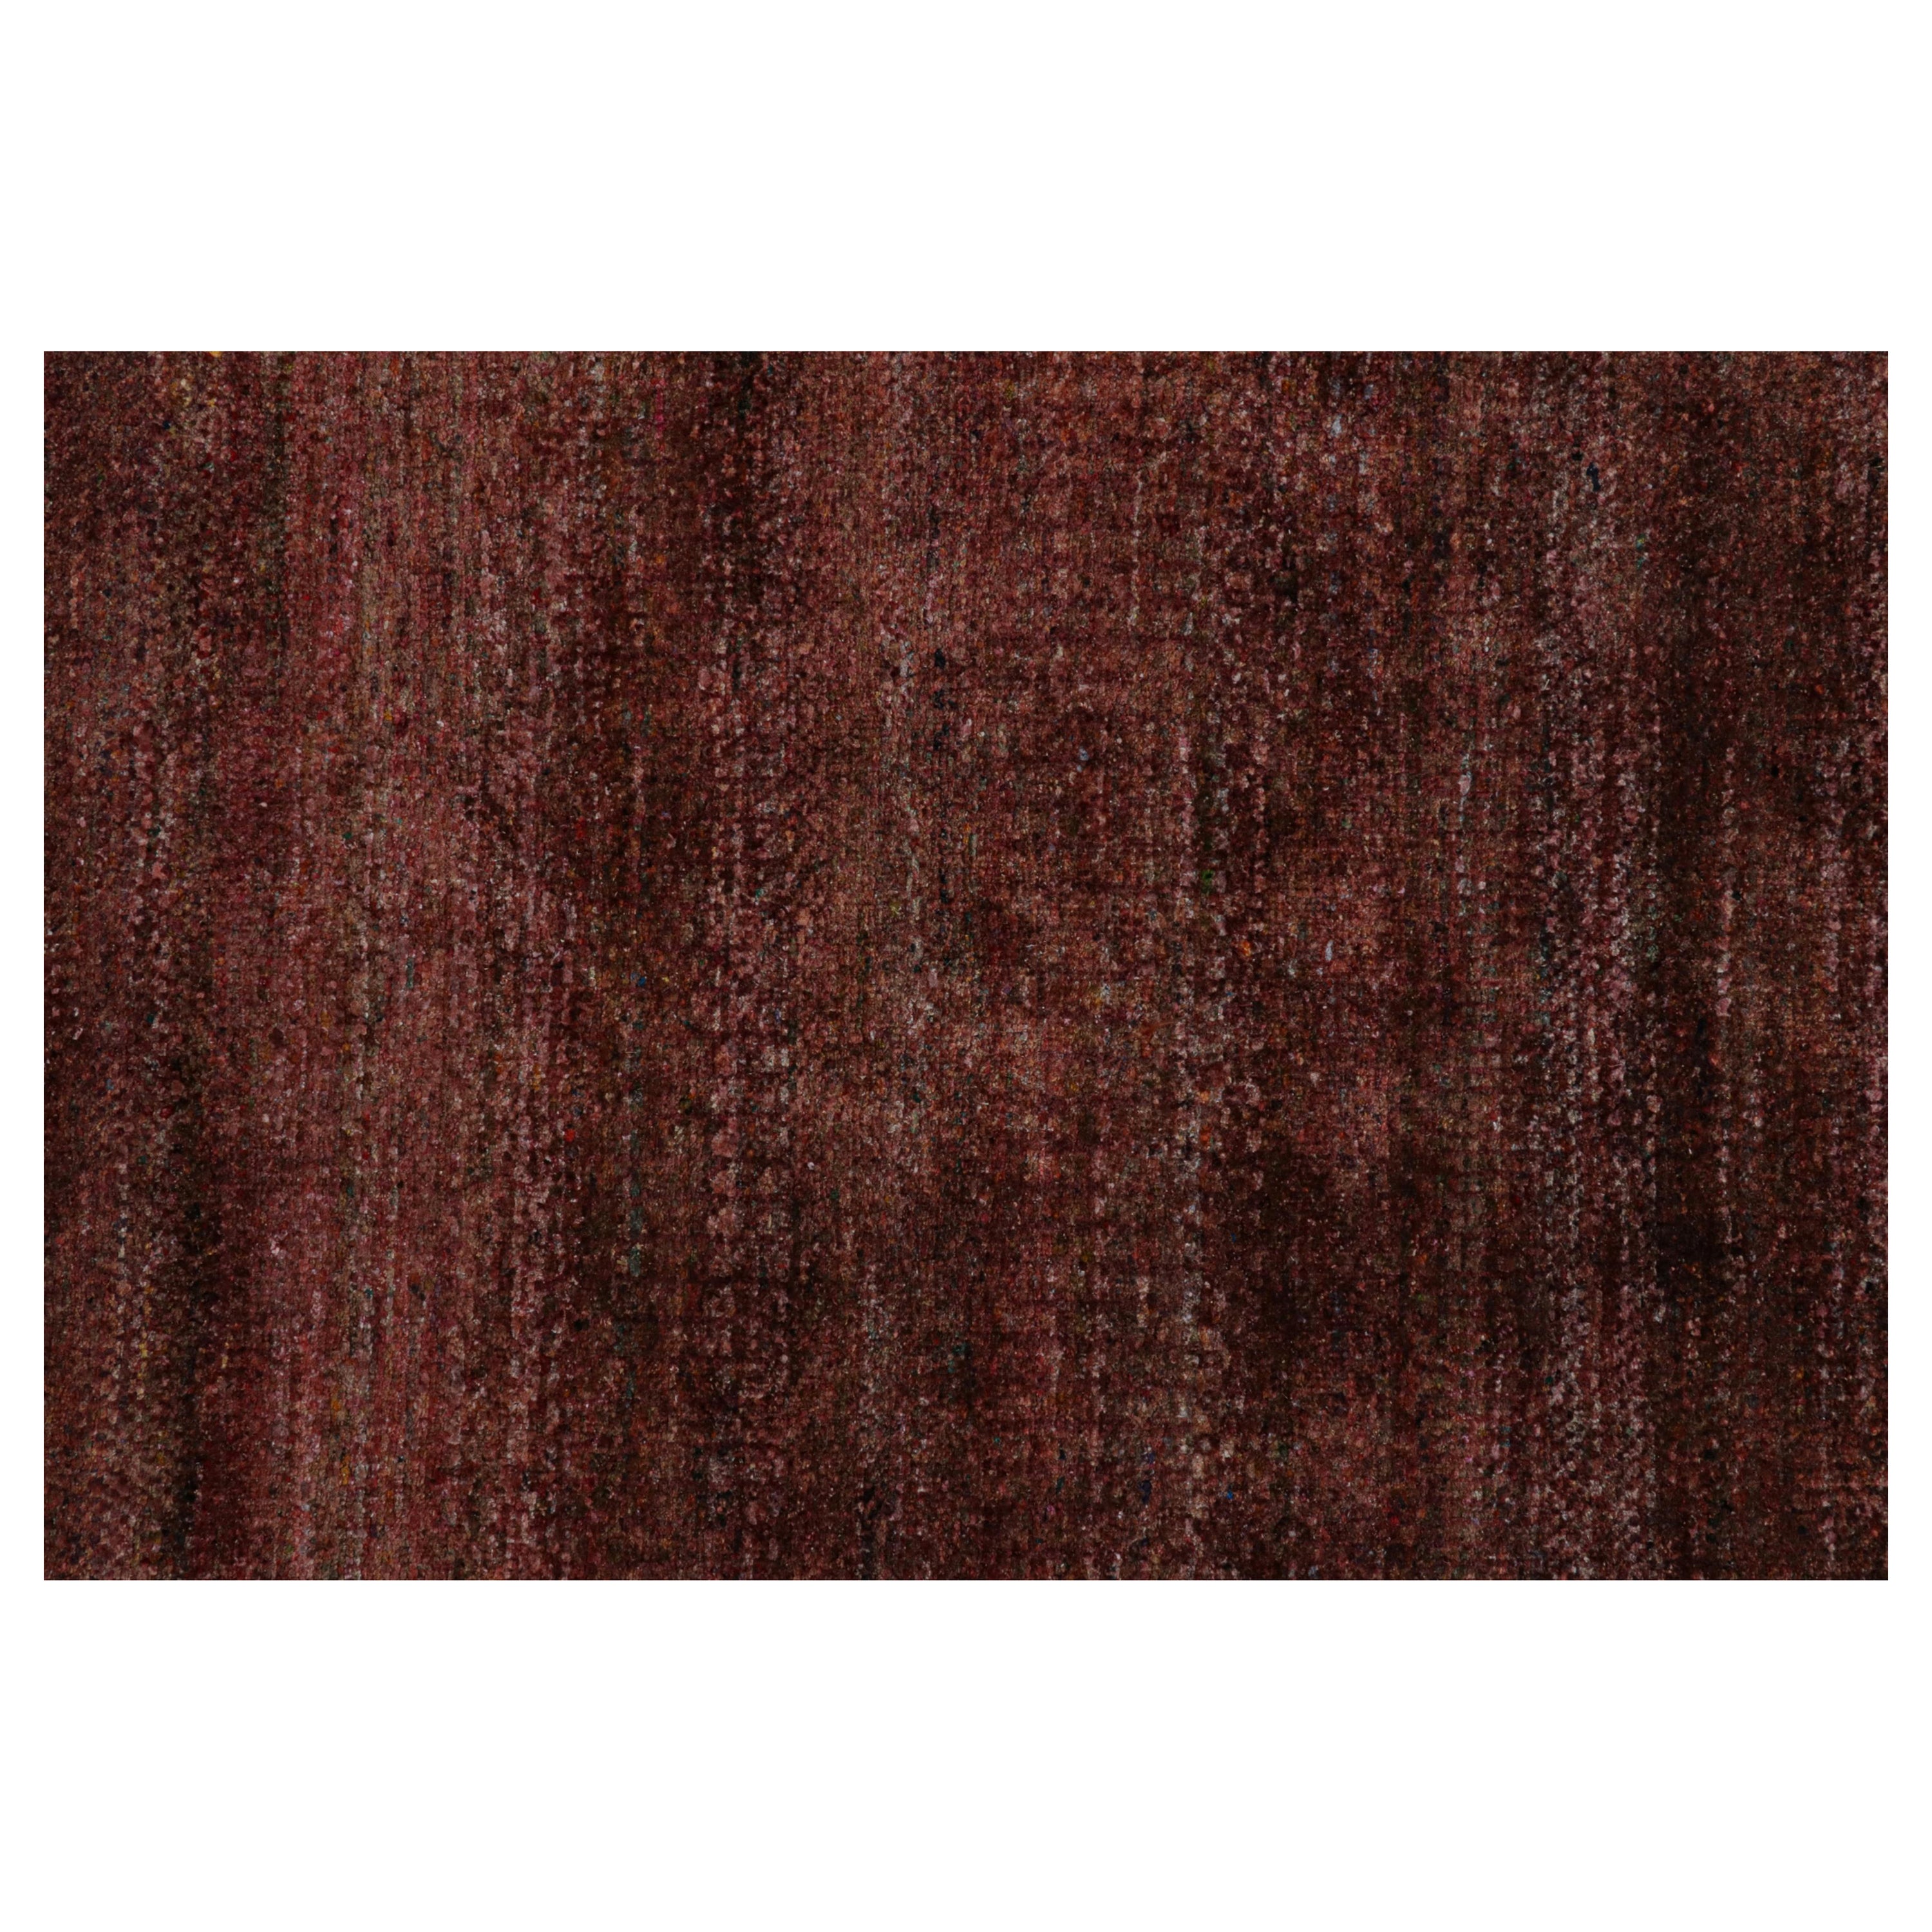 Rug & Kilim’s Modern Textural Rug in Red Tones and Striae For Sale